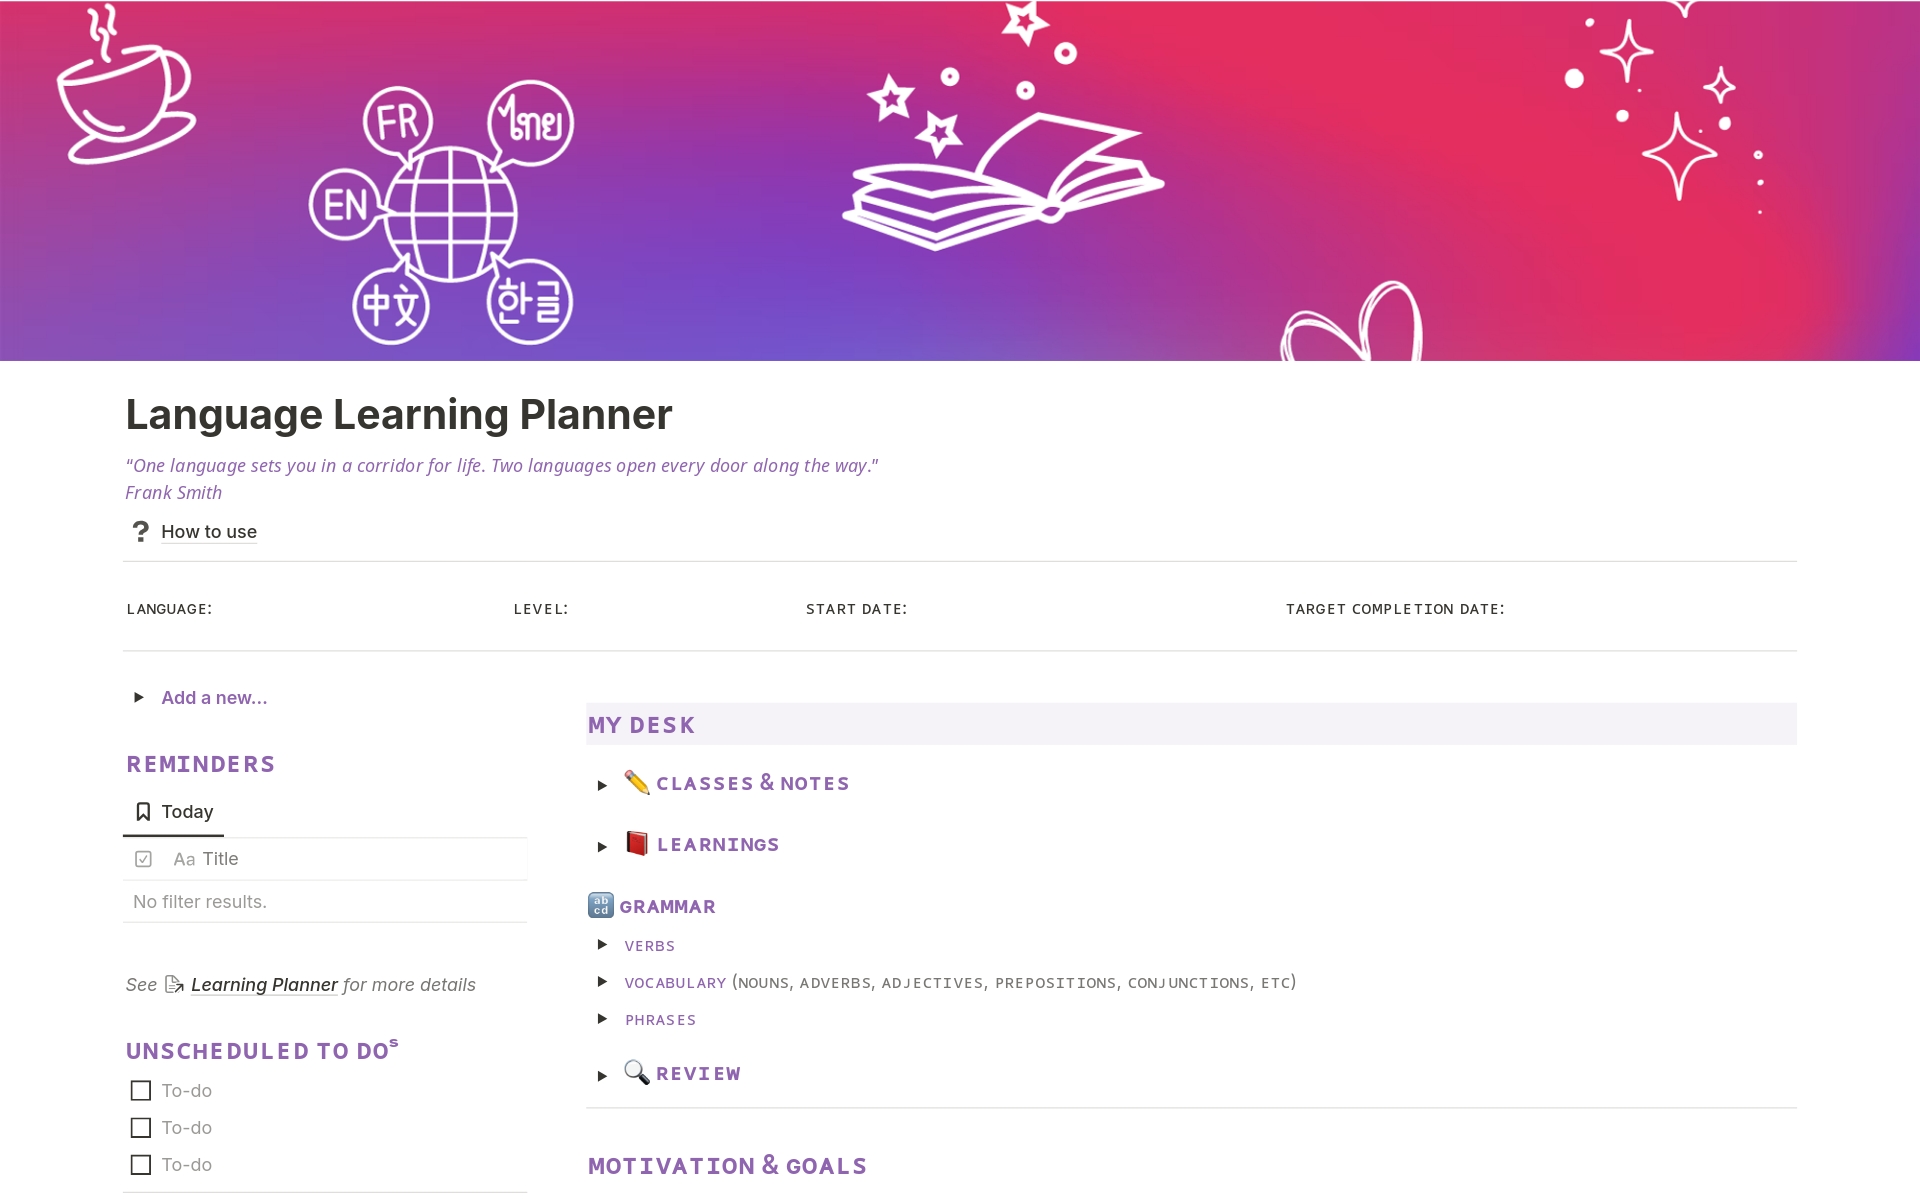 Language-learning planner to help you spend less time organizing and more time studying.